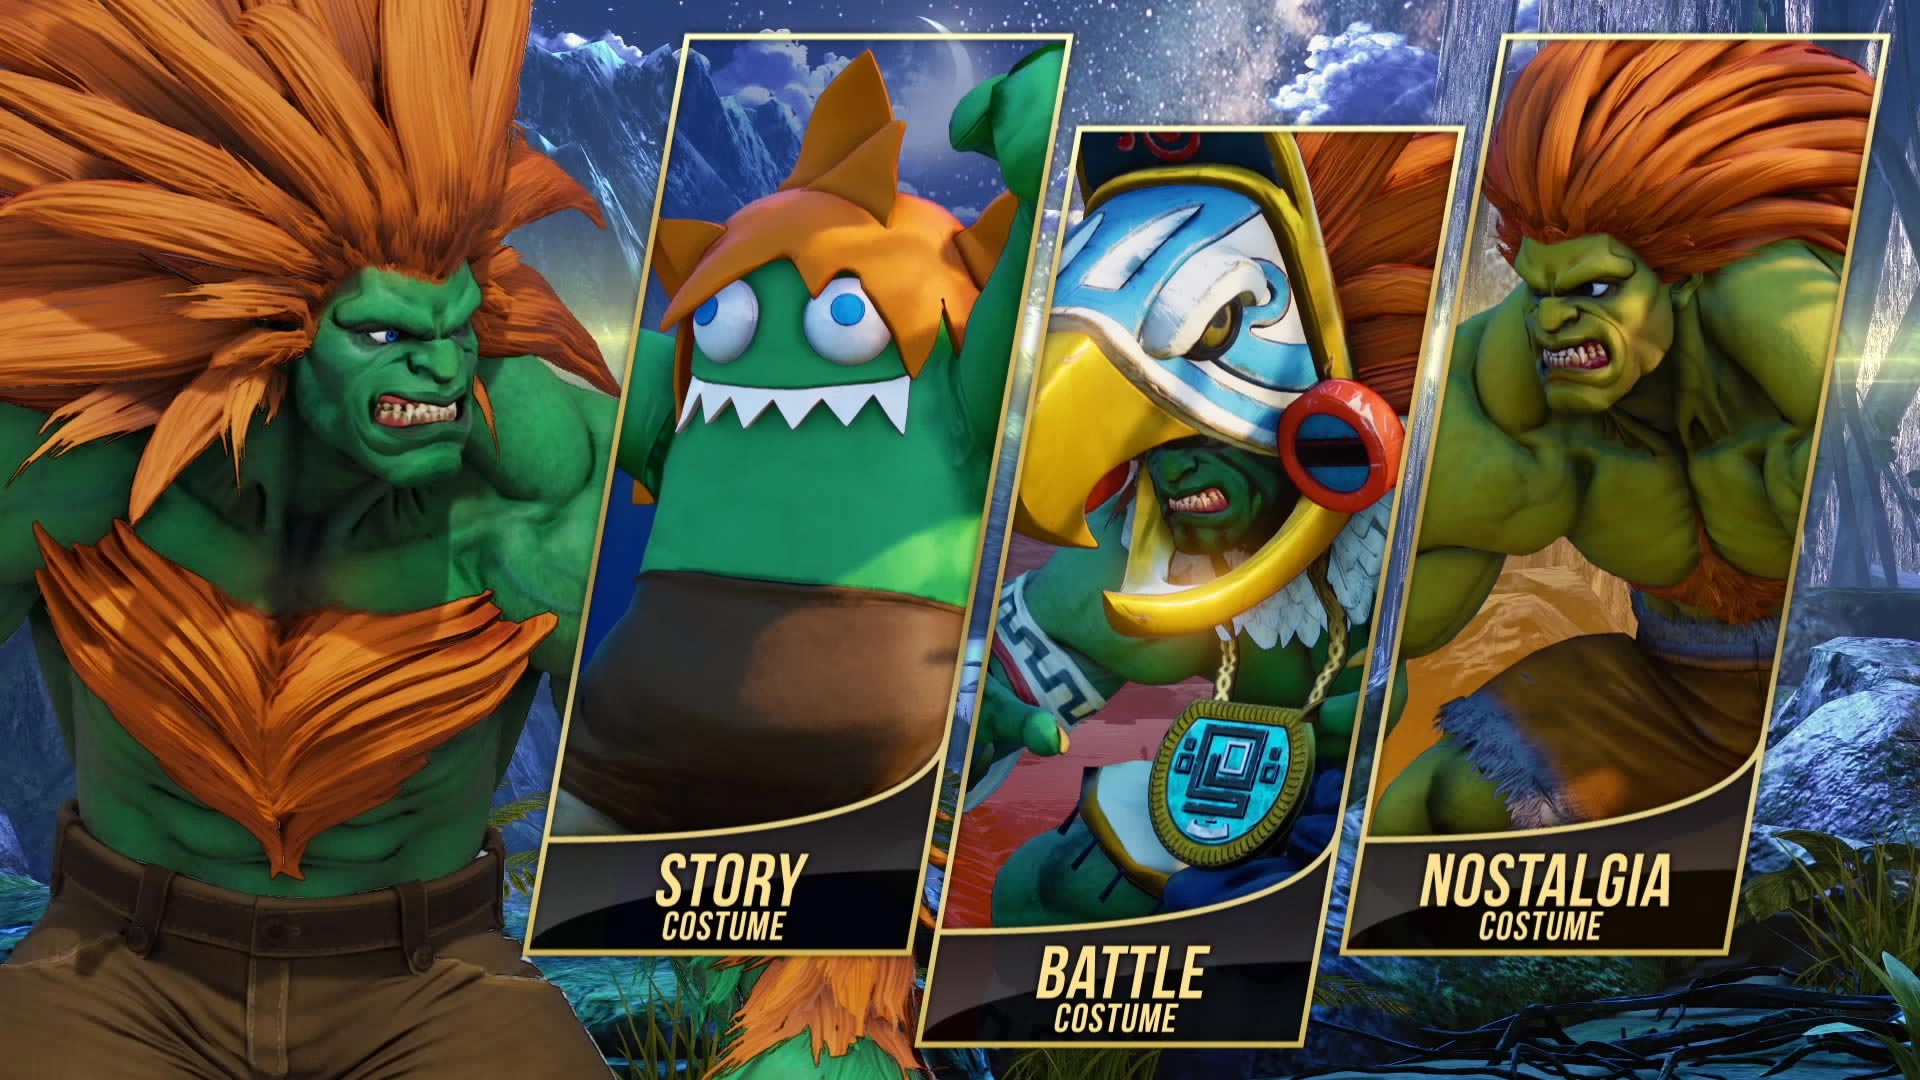 BEST FTP UNIT IN THE GAME Fashion Blanka is a monster and he is